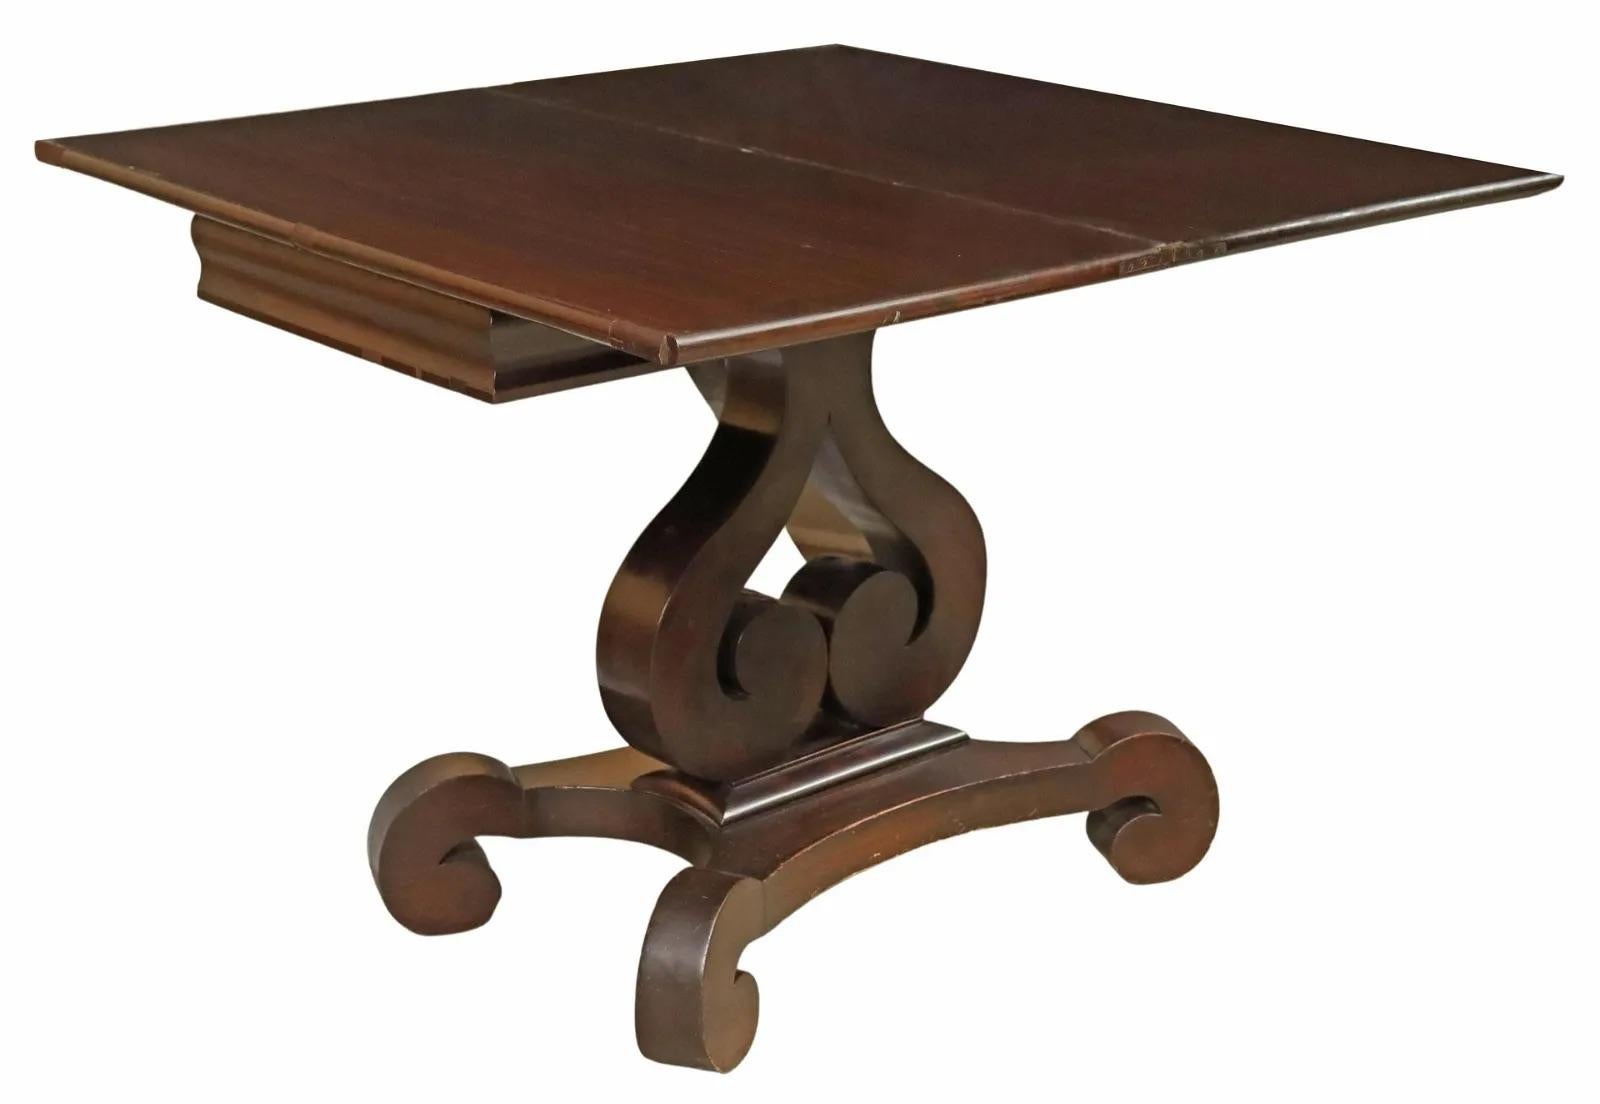 American Empire period mahogany games table, 19th c., having rectangular flip top, over interior compartments, rising on double scroll base, ending on quadripartite scrolled feet.

Dimensions: approx 27.25